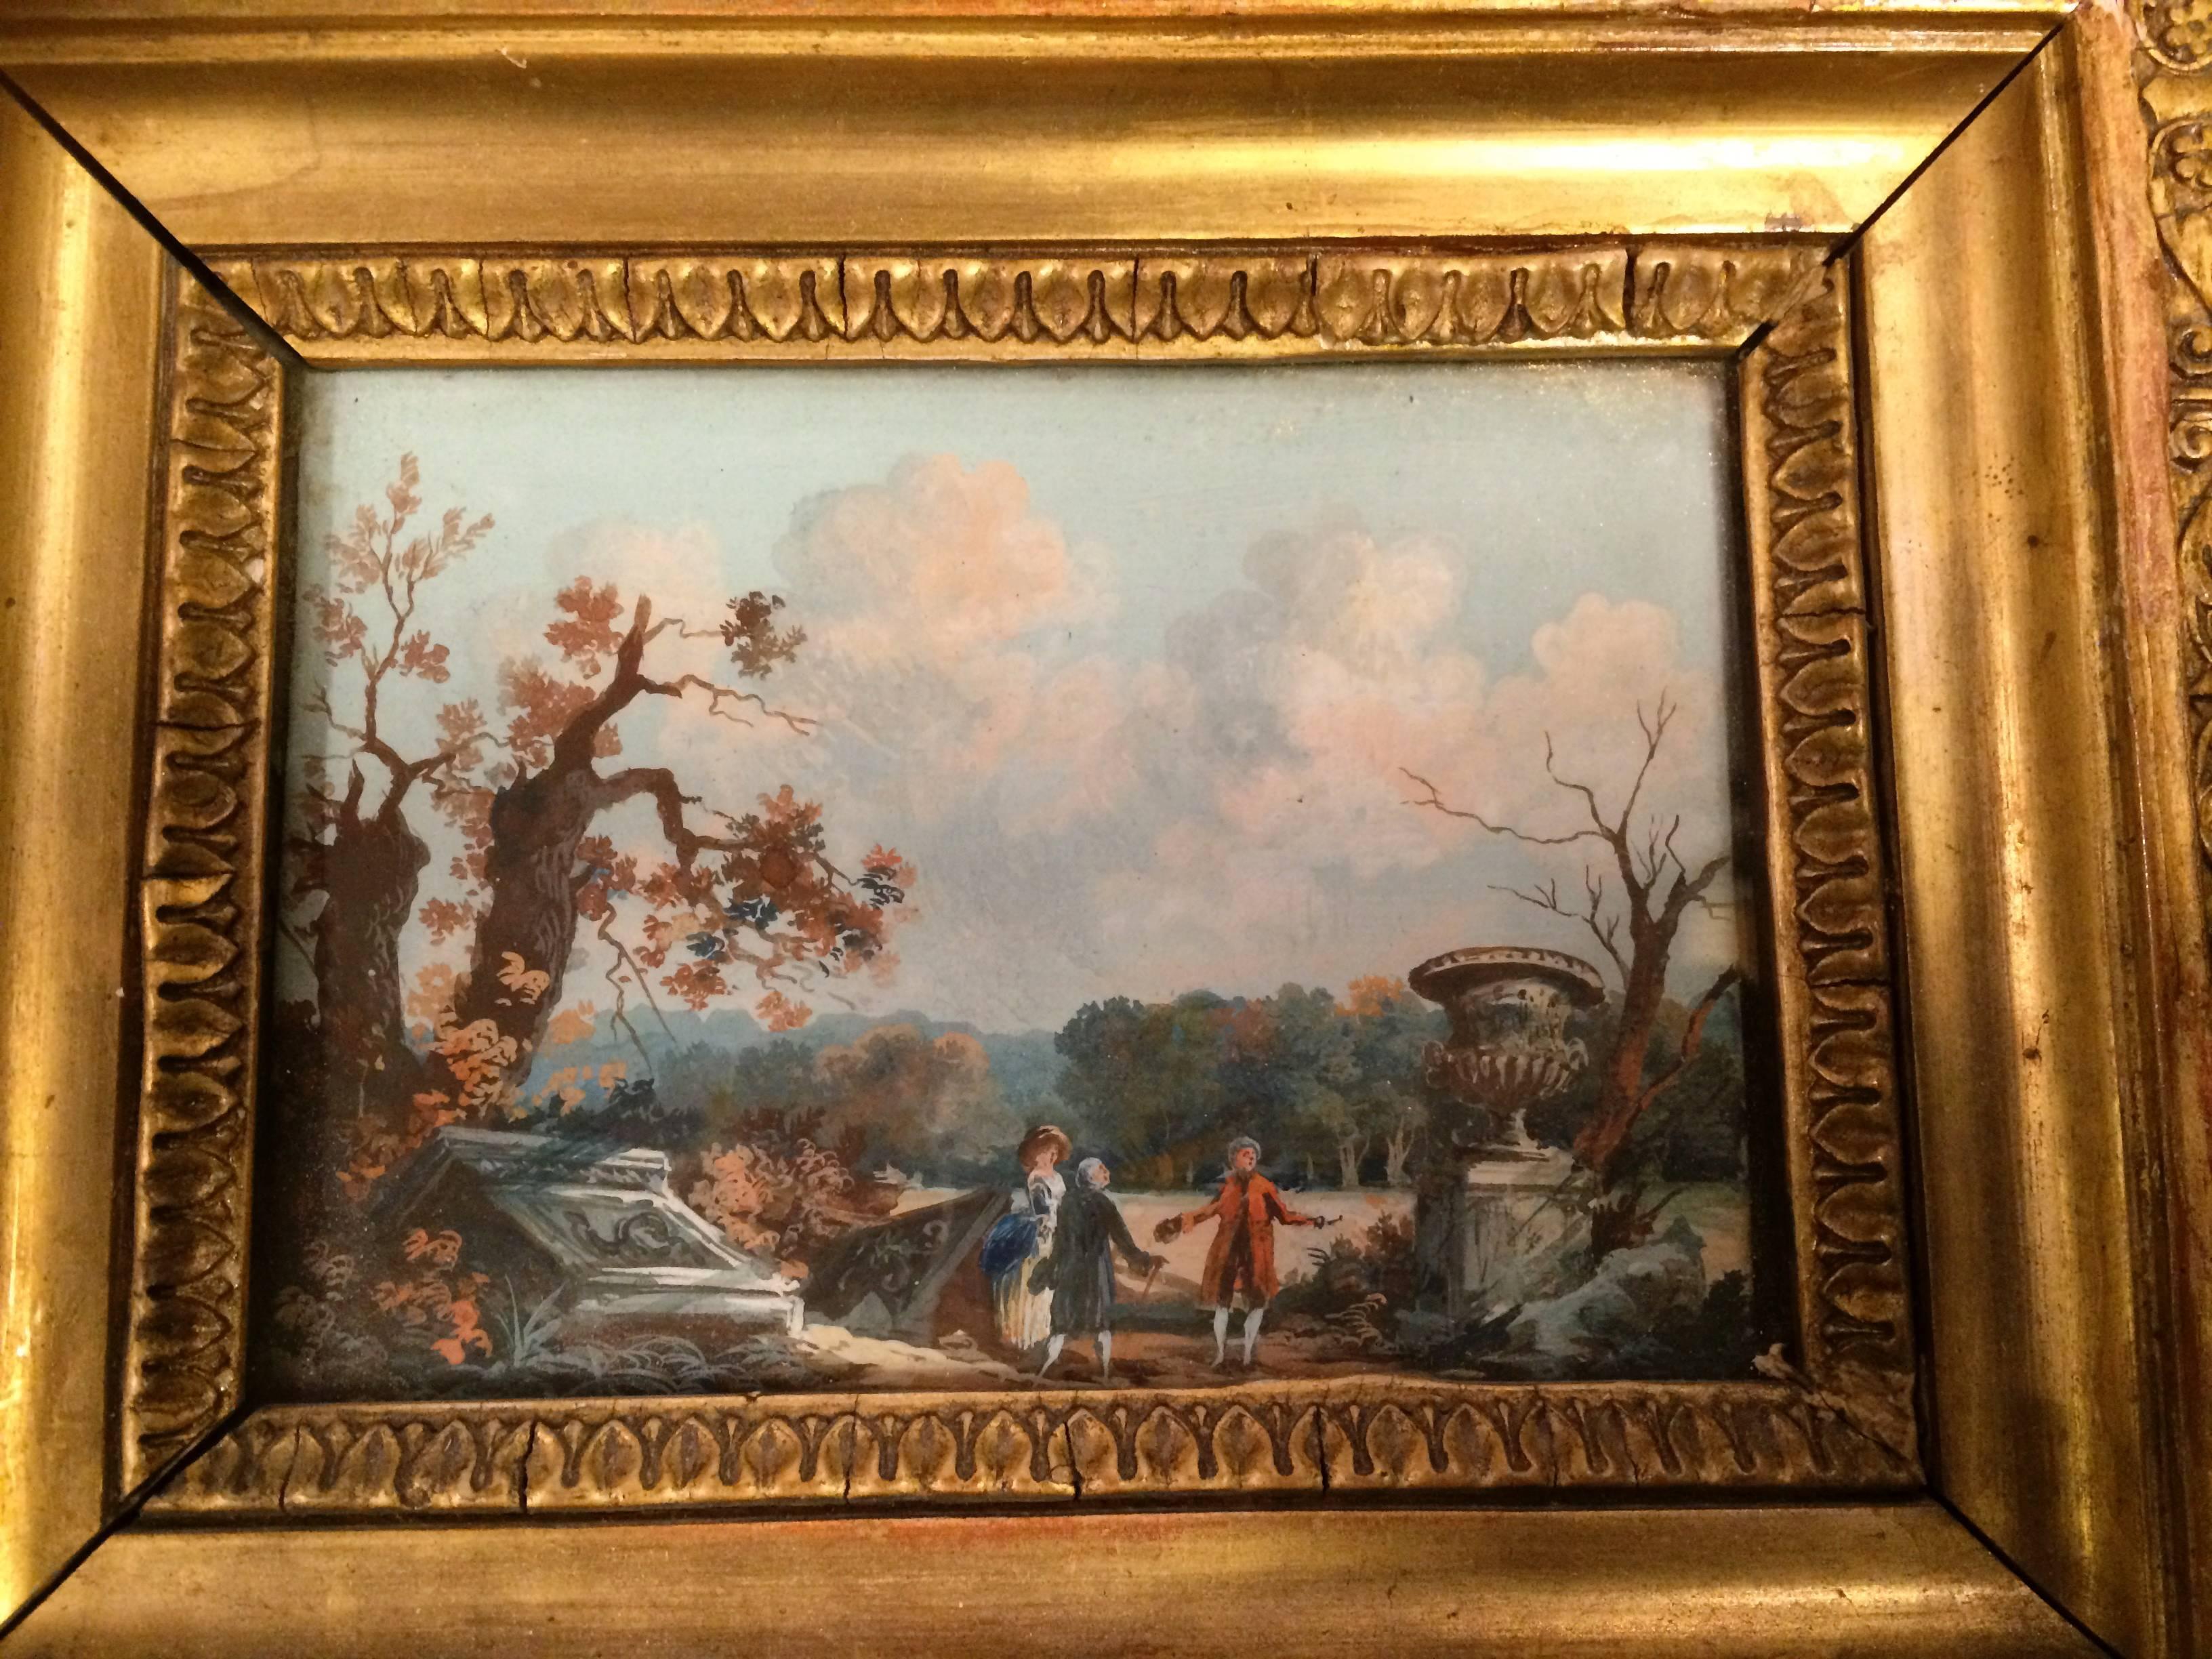 Neoclassical miniature gouache depicting figures on the 'Grand Tour' viewing a large marble urn and other Roman era ruins in a beautifully rendered landscape. In a period giltwood frame.